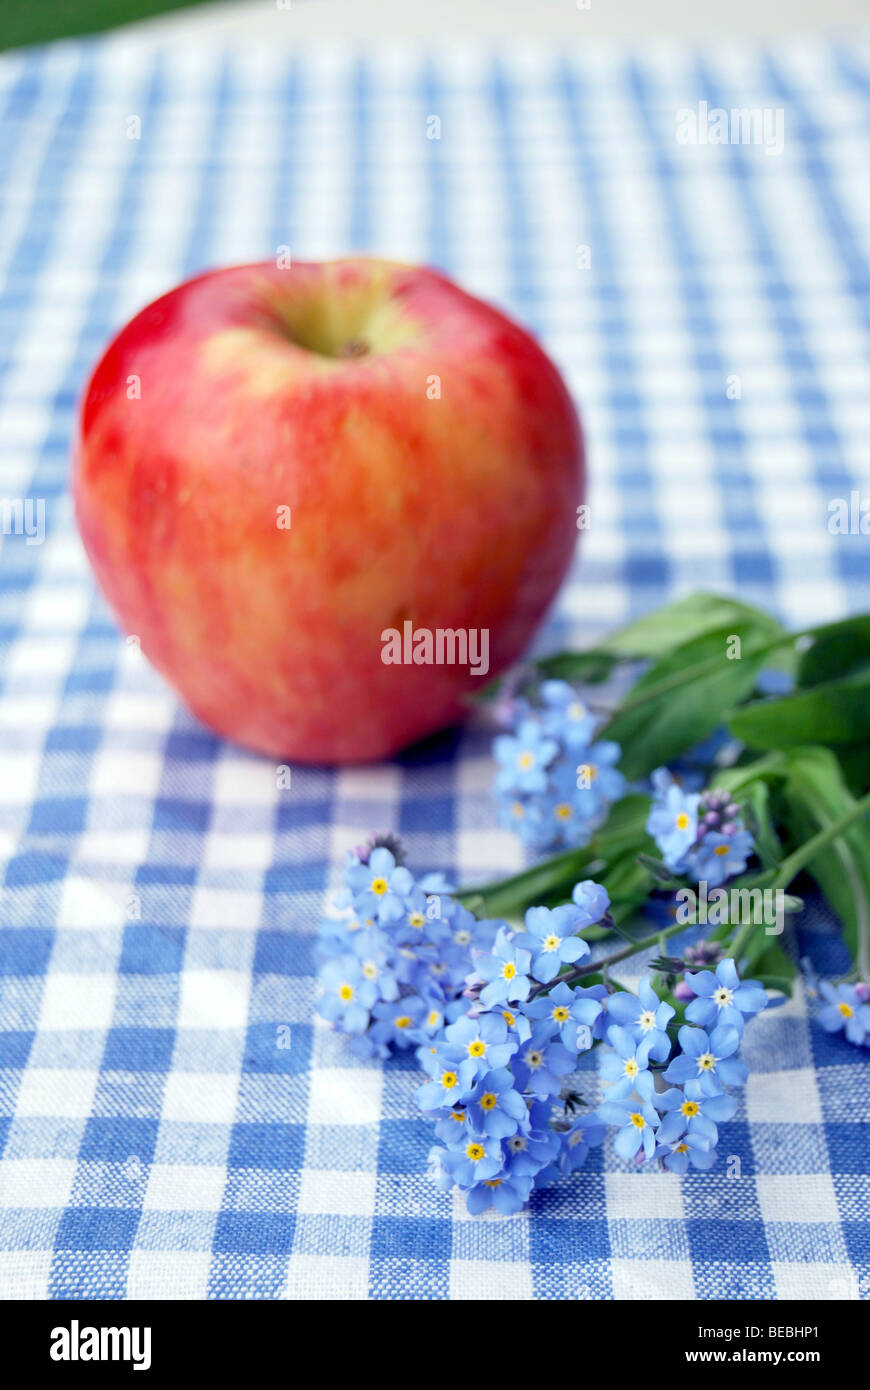 Forget-me-not (Myosotis) and organic apple on a plaid tablecloth Stock Photo